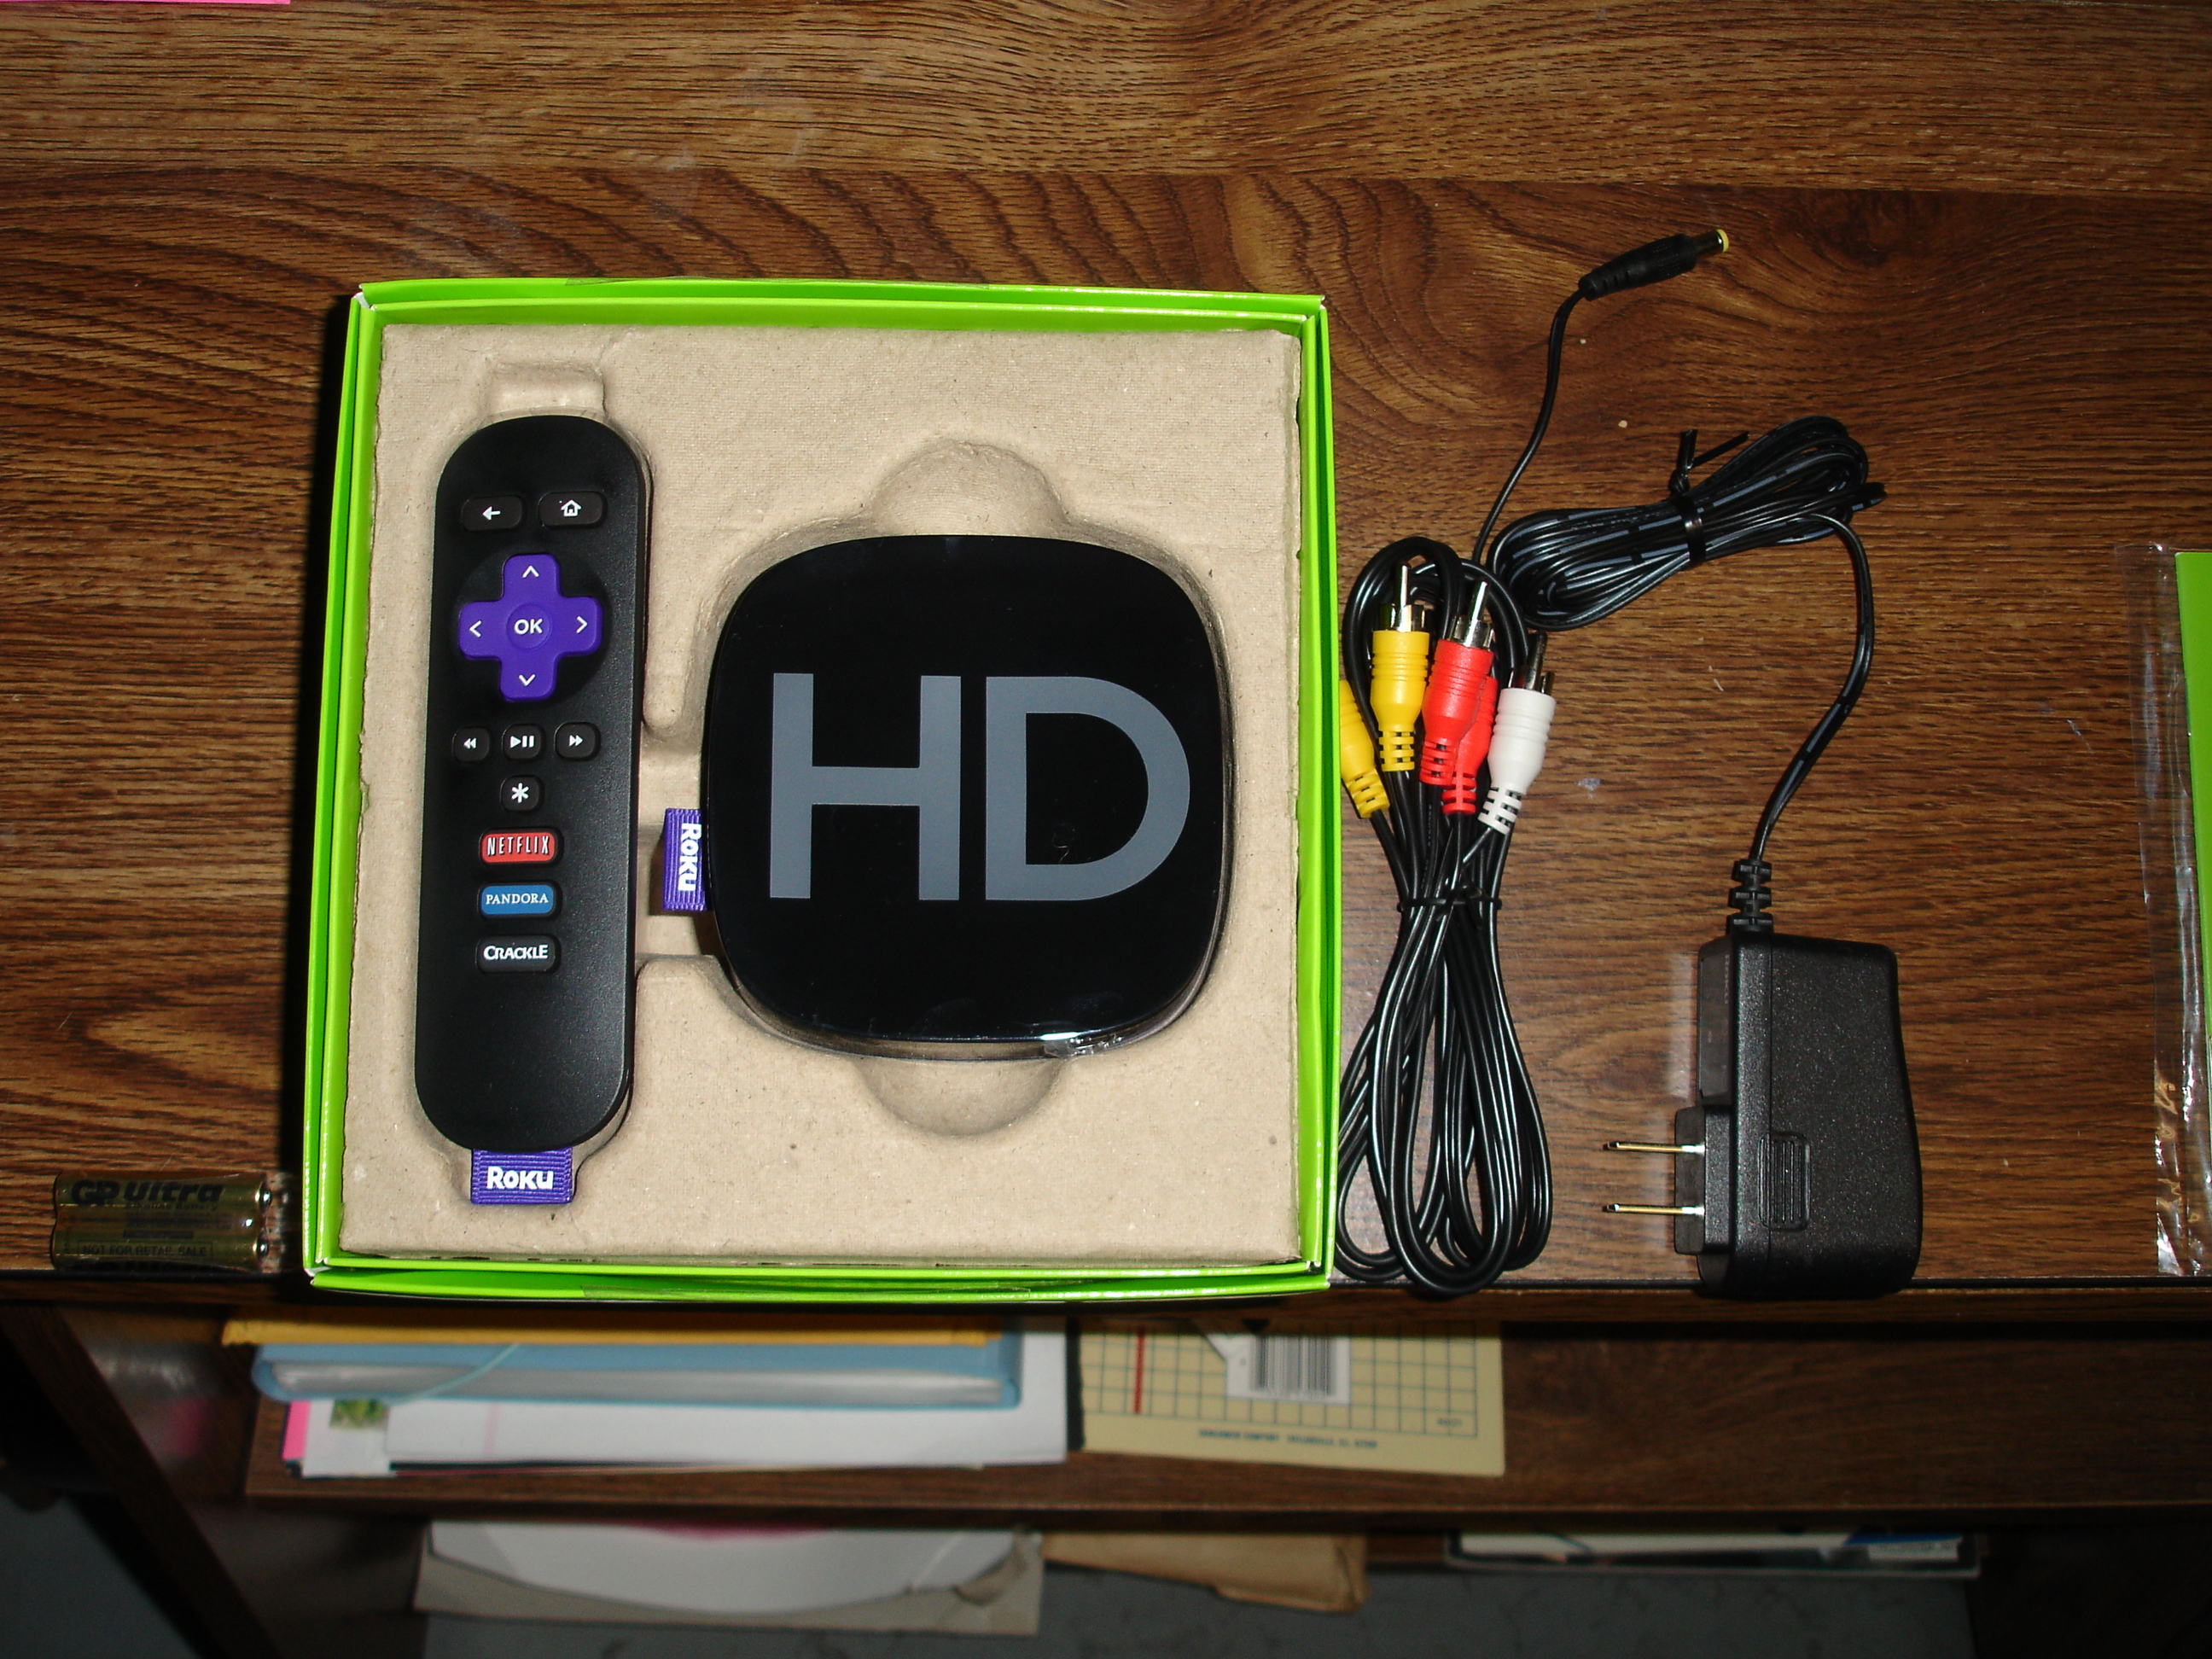 Does Roku Player Come With Hdmi Cable